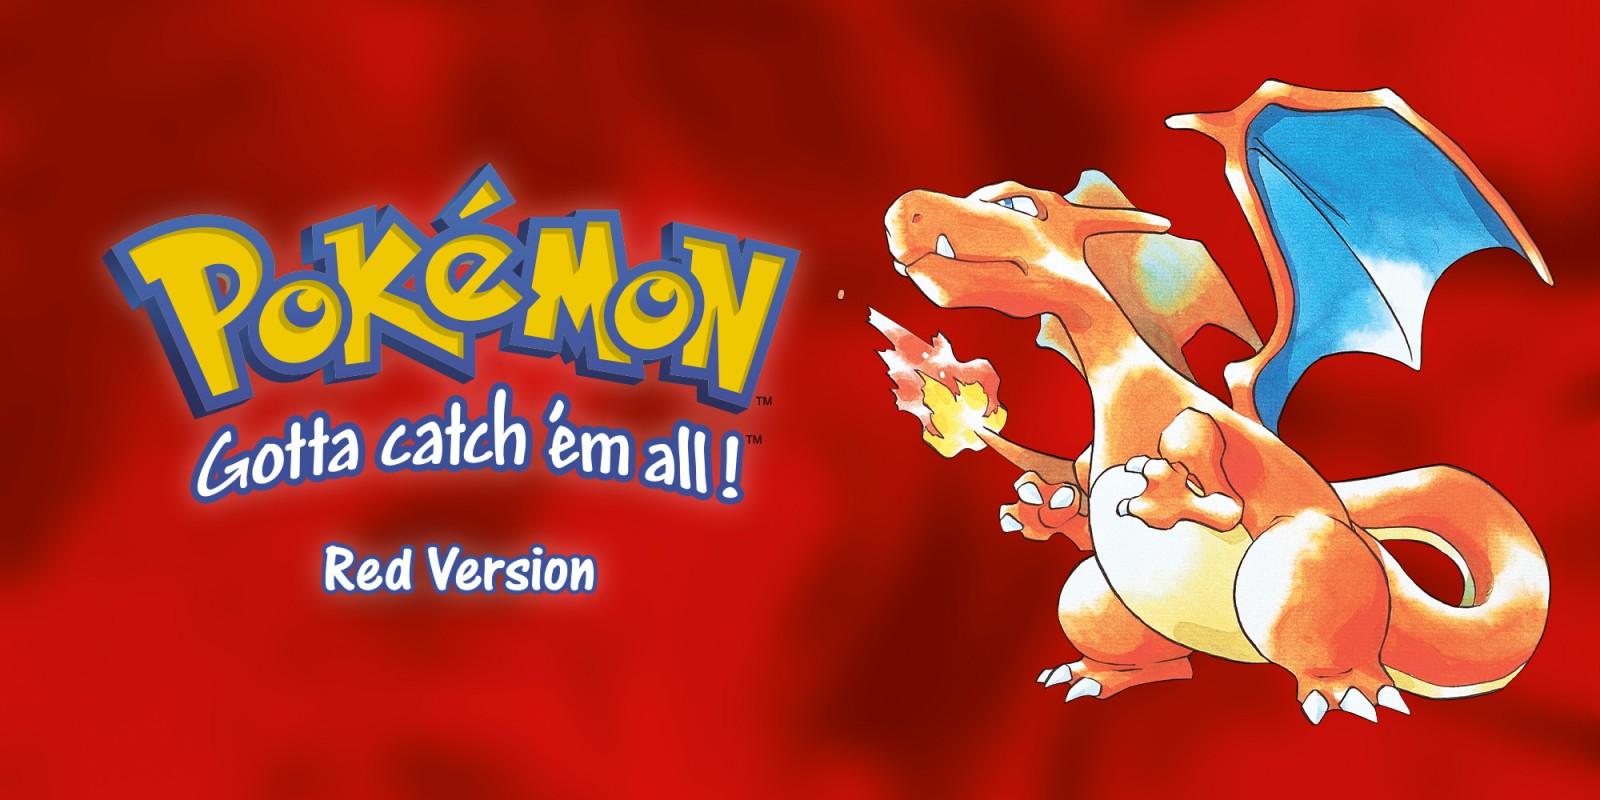 Can you play older Pokemon games on the Nintendo Switch?